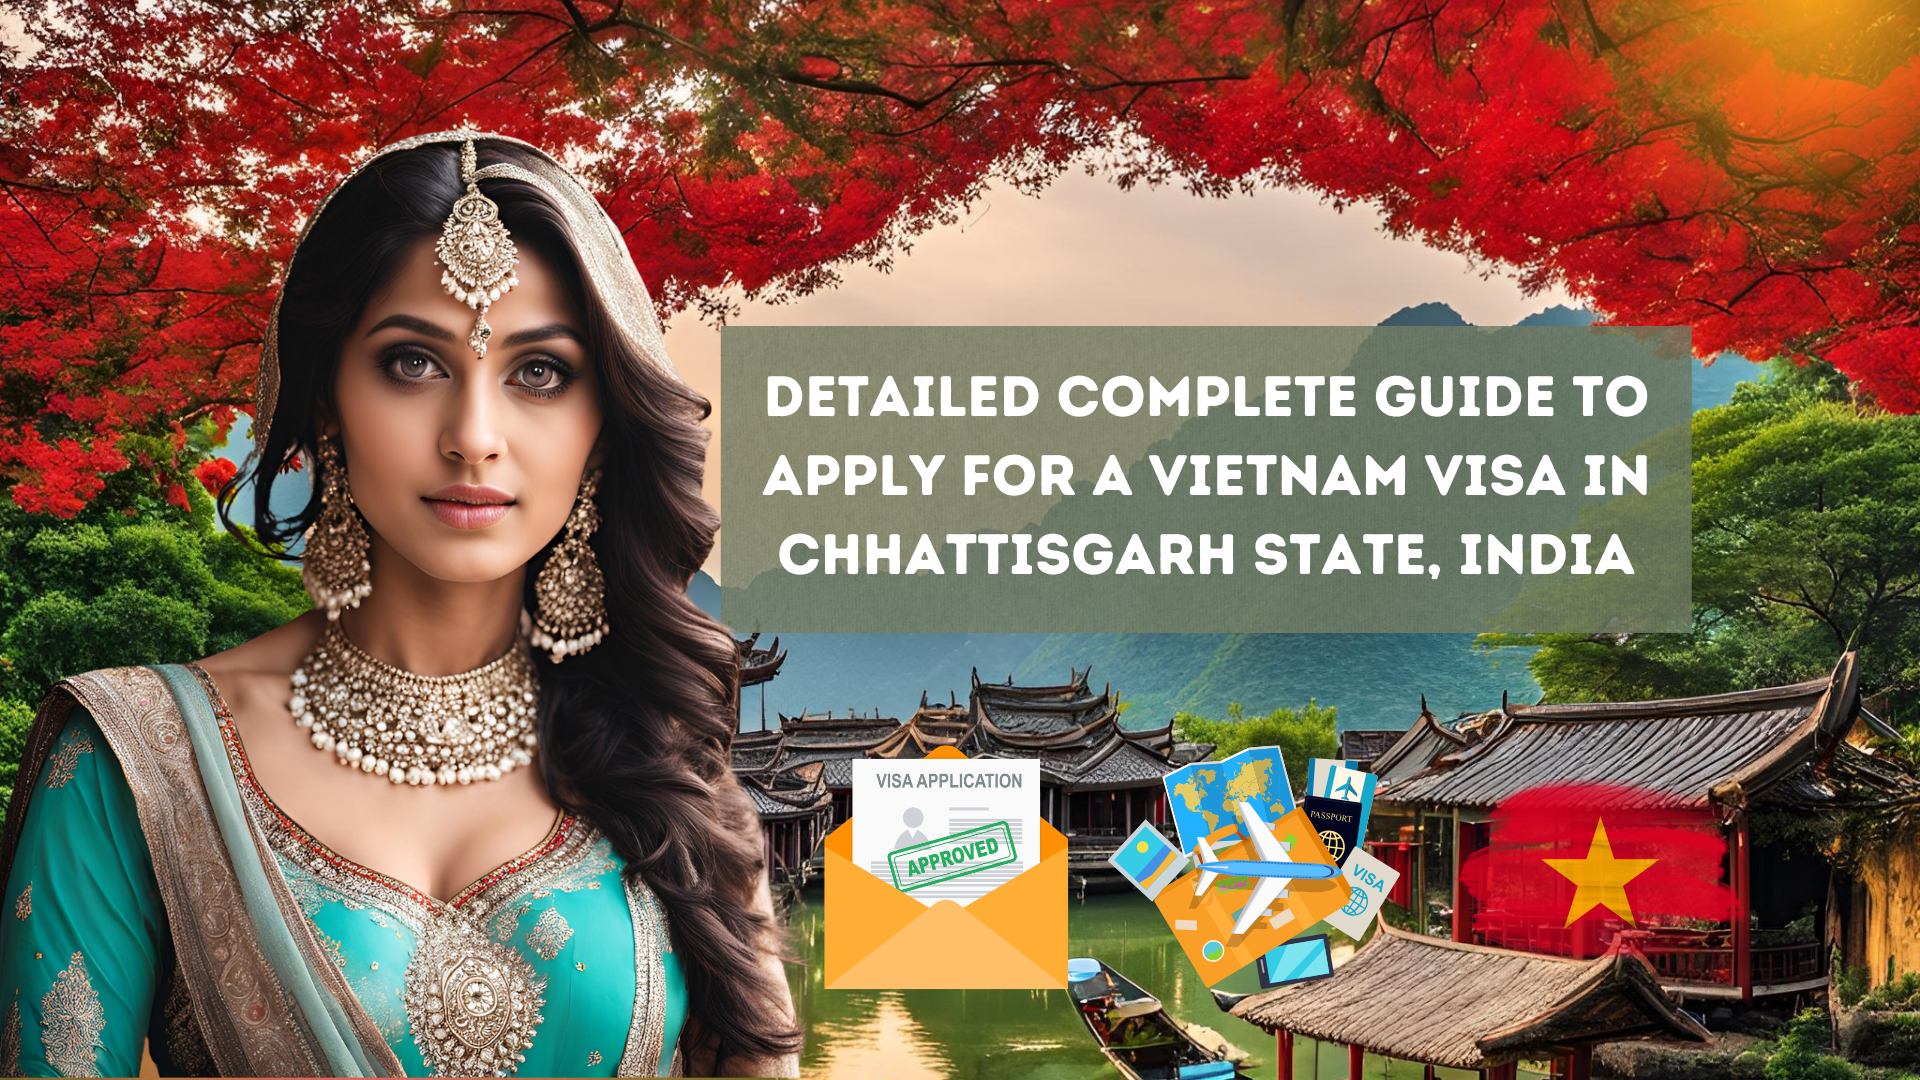 Detailed Complete Guide to Apply for a Vietnam Visa in Chhattisgarh State, India